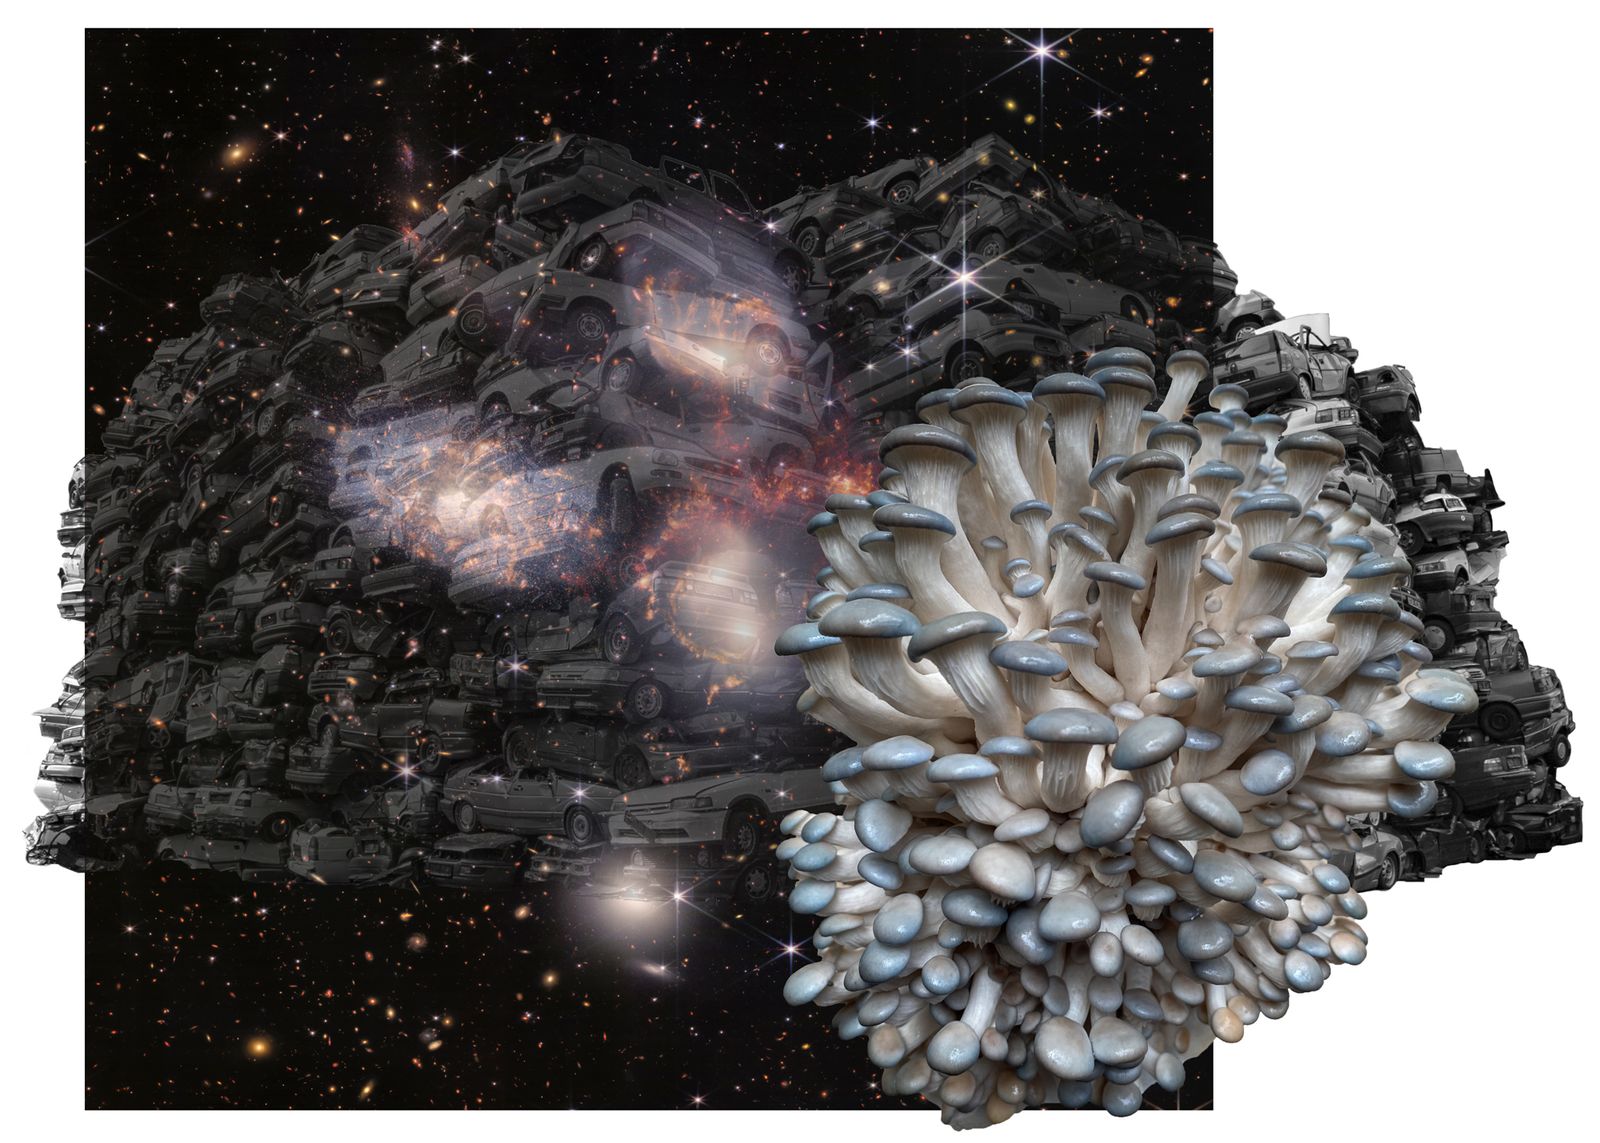 © Florence Iff - heap of cars, mushrooms, James-Webb picture of the universe